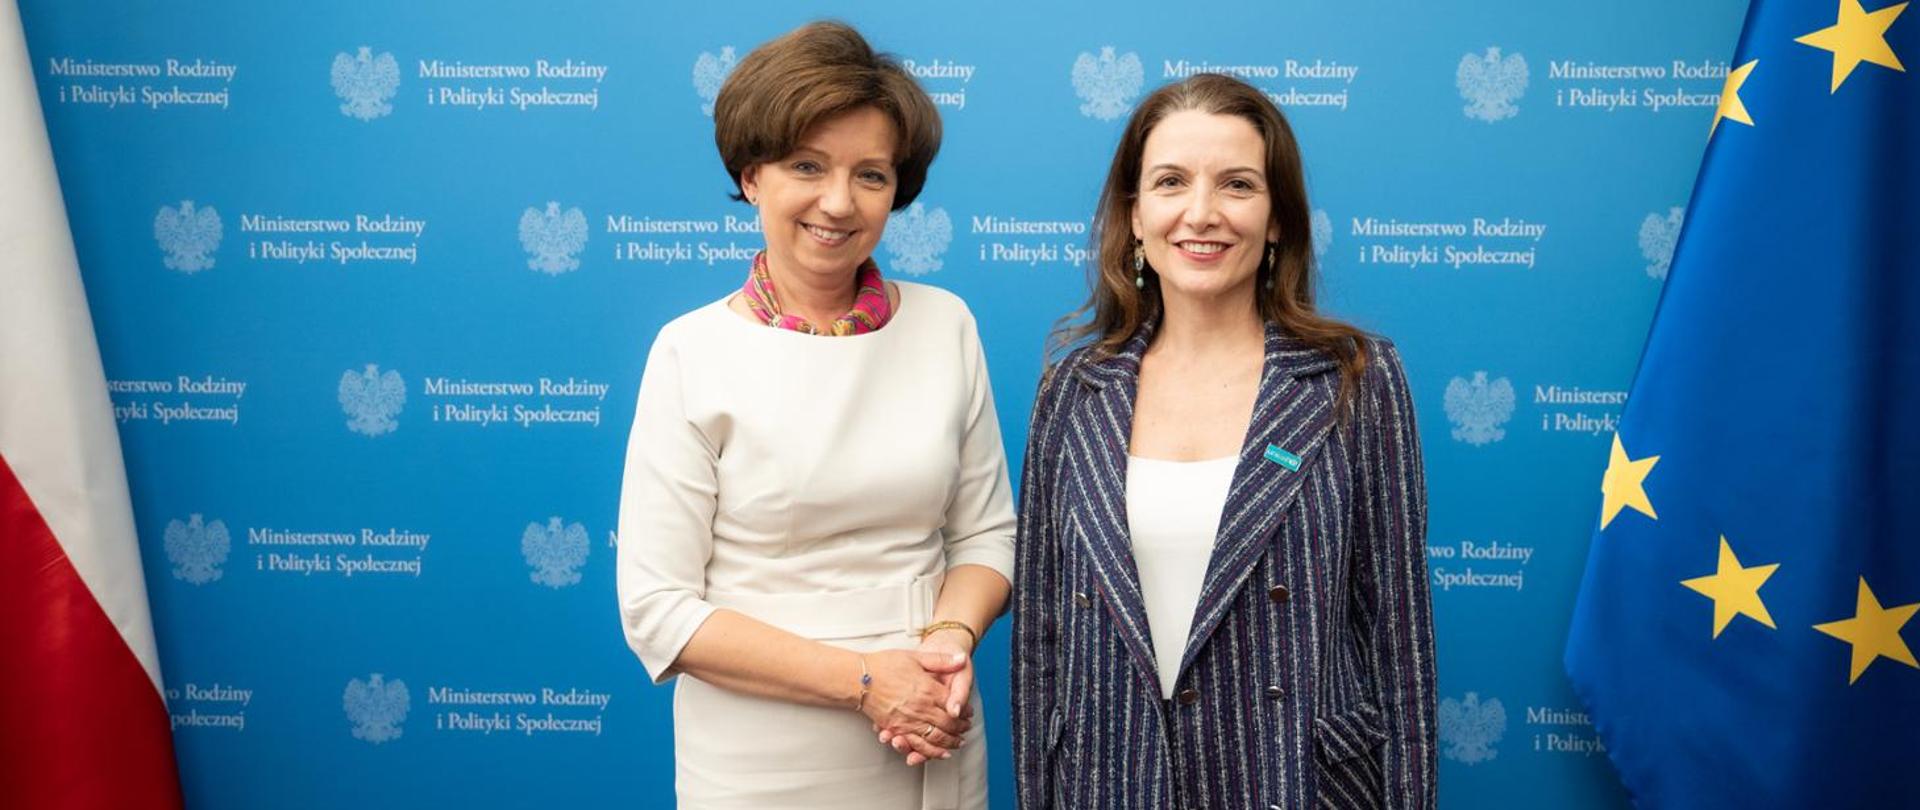 A meeting between Minister Marlena Maląg and the Director of the UNICEF Regional Office